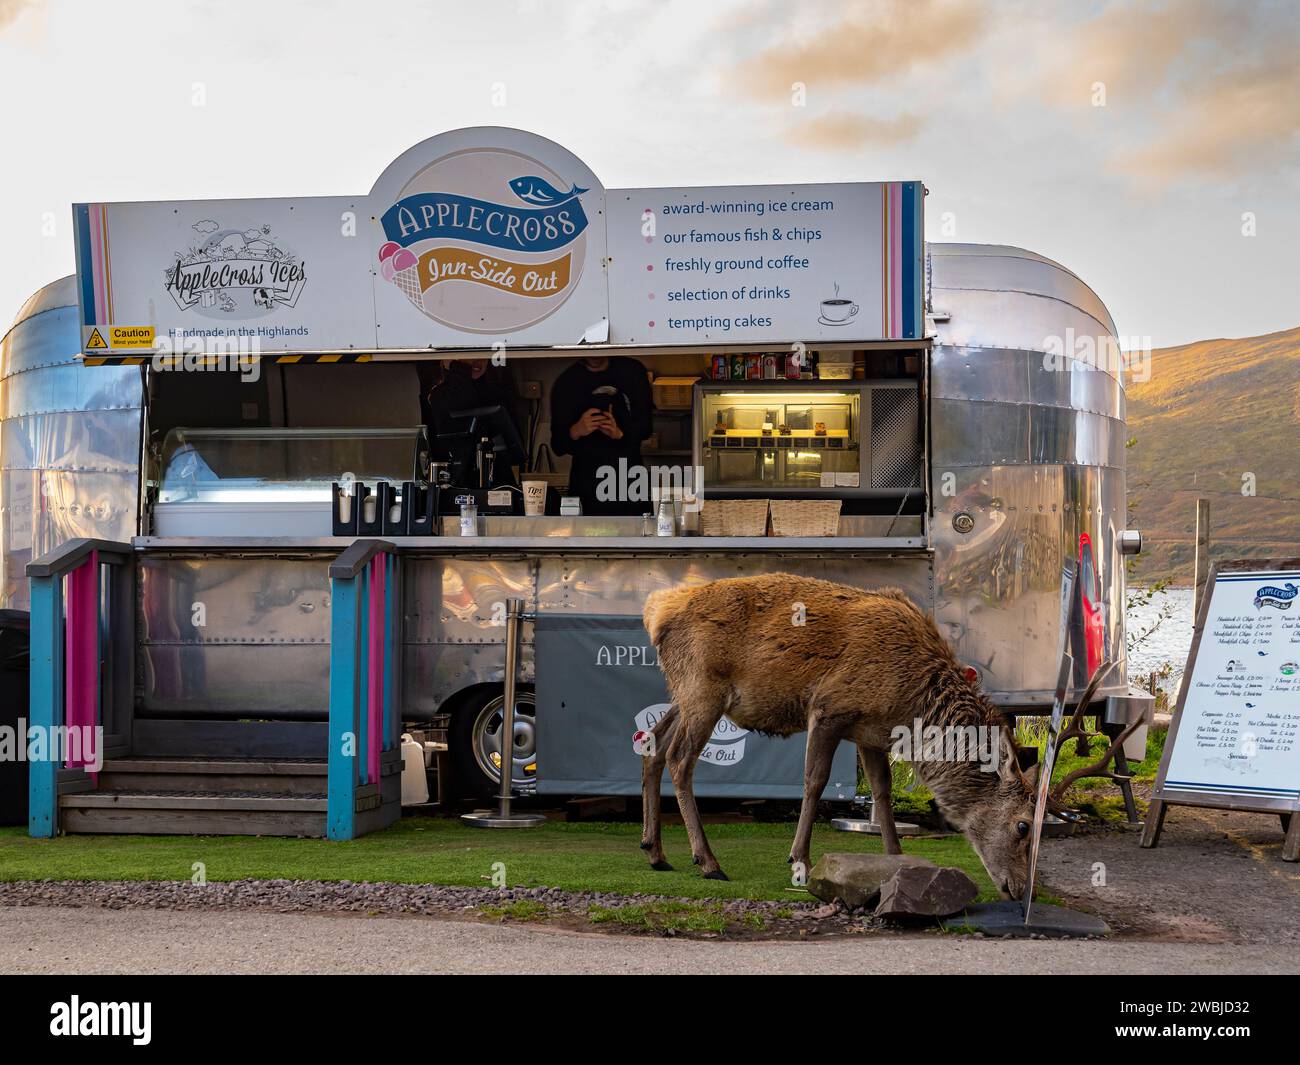 Inn-Side Out retro food truck outside the Applecross Inn with a Stag eating in front, Applecross, Wester Ross, Scotland, UK, Highlands Great Britain Stock Photo